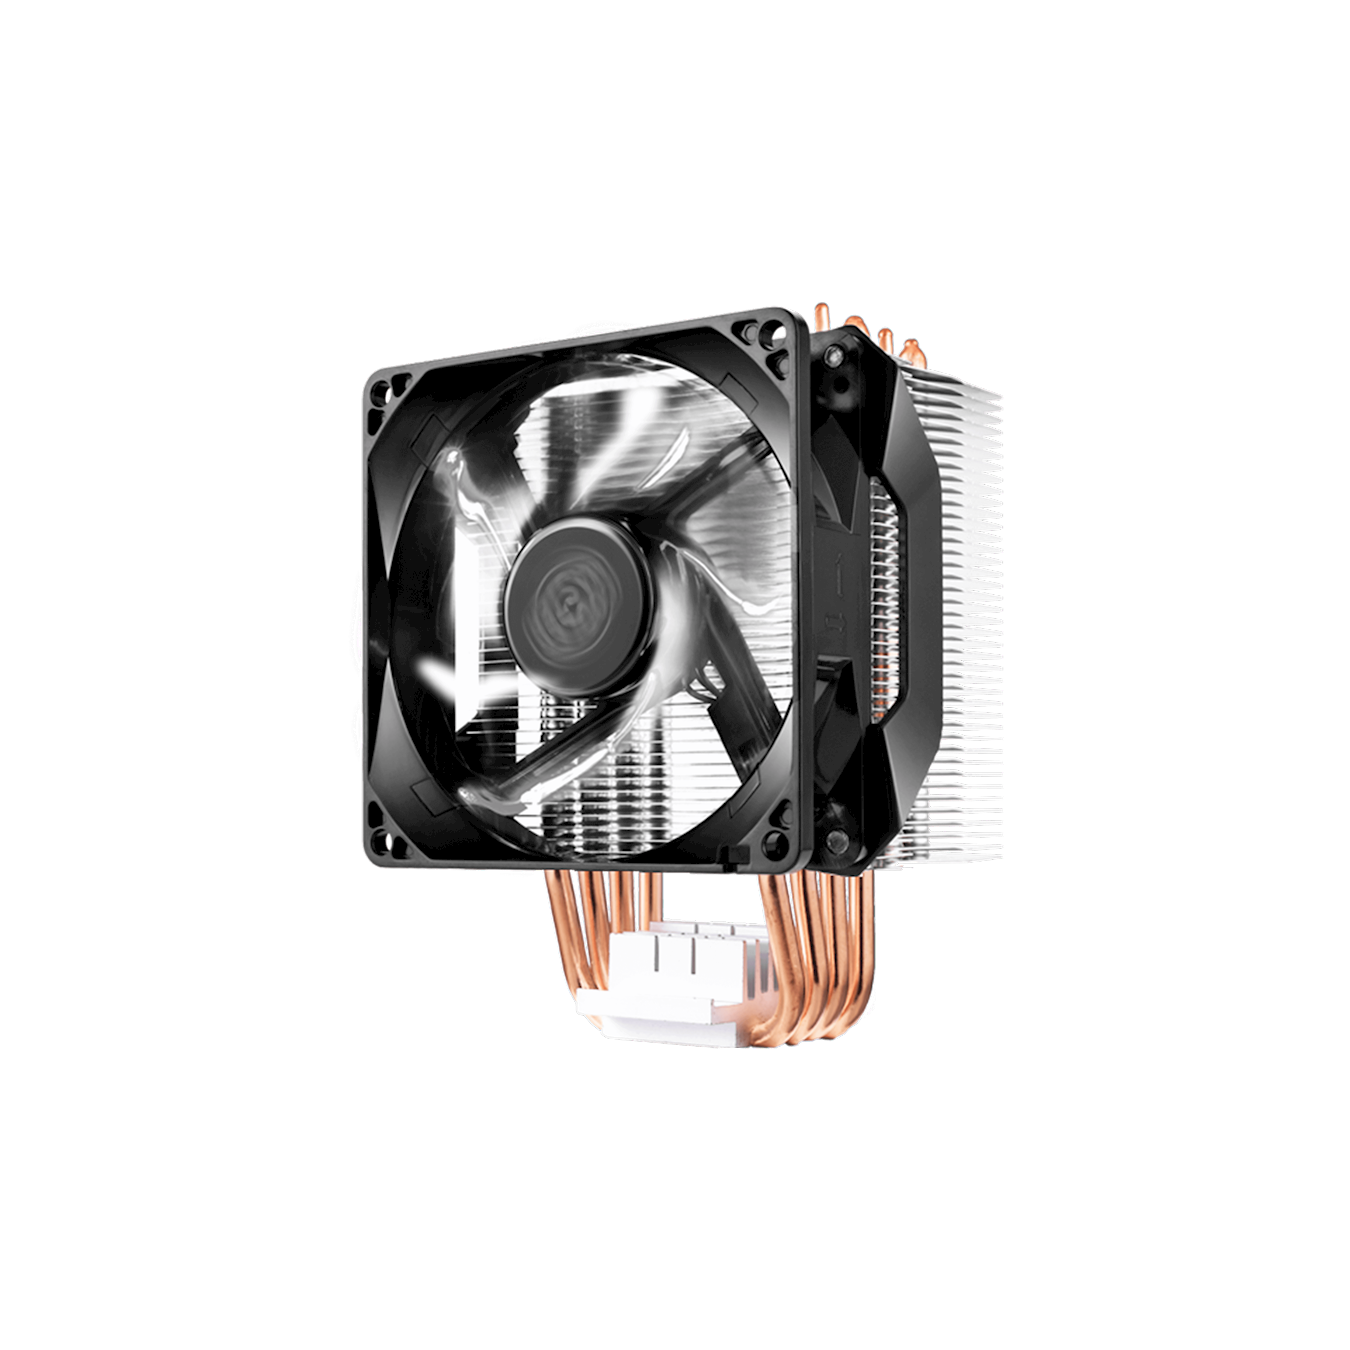 The Hyper H411R is a small, low-profile, quiet cooler designed to fit in limited spaces. With its outstanding performance in its class, it is a perfect solution for small form factor cases.